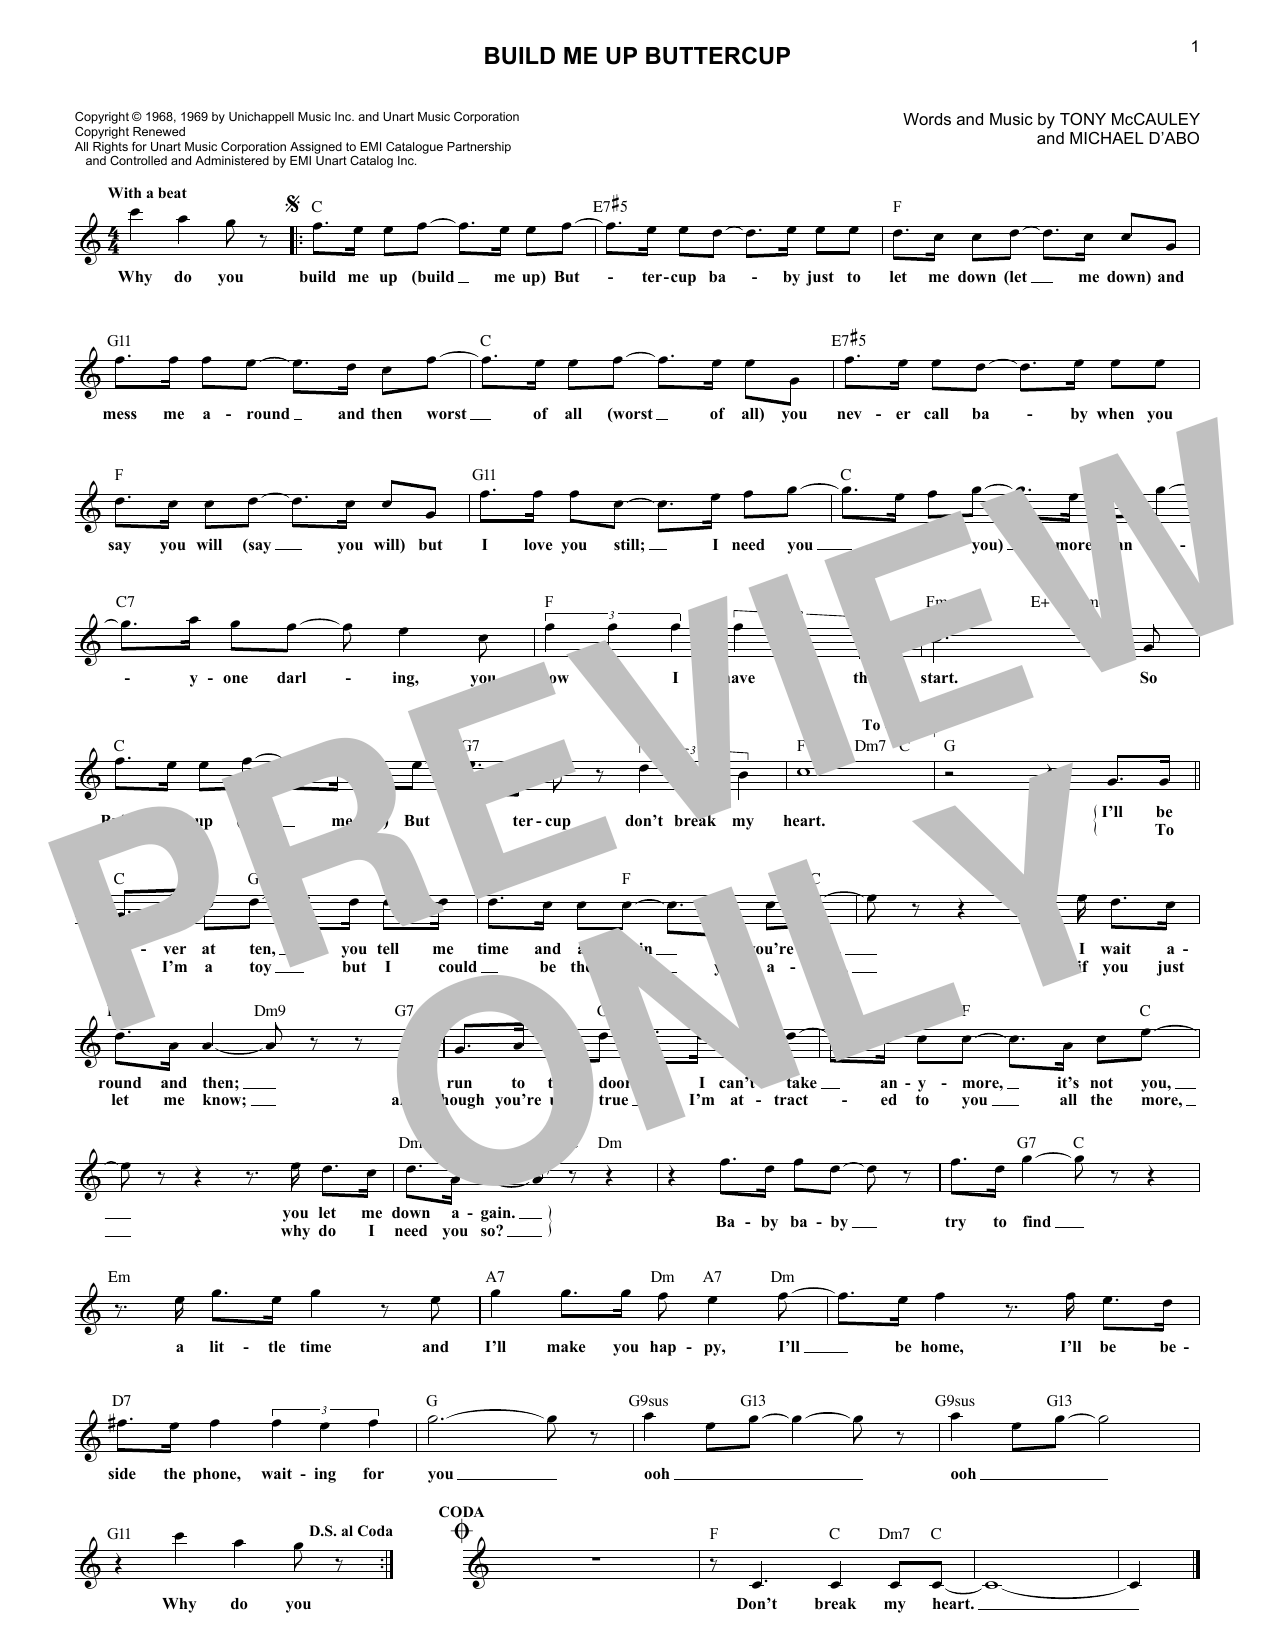 Download The Foundations Build Me Up, Buttercup Sheet Music